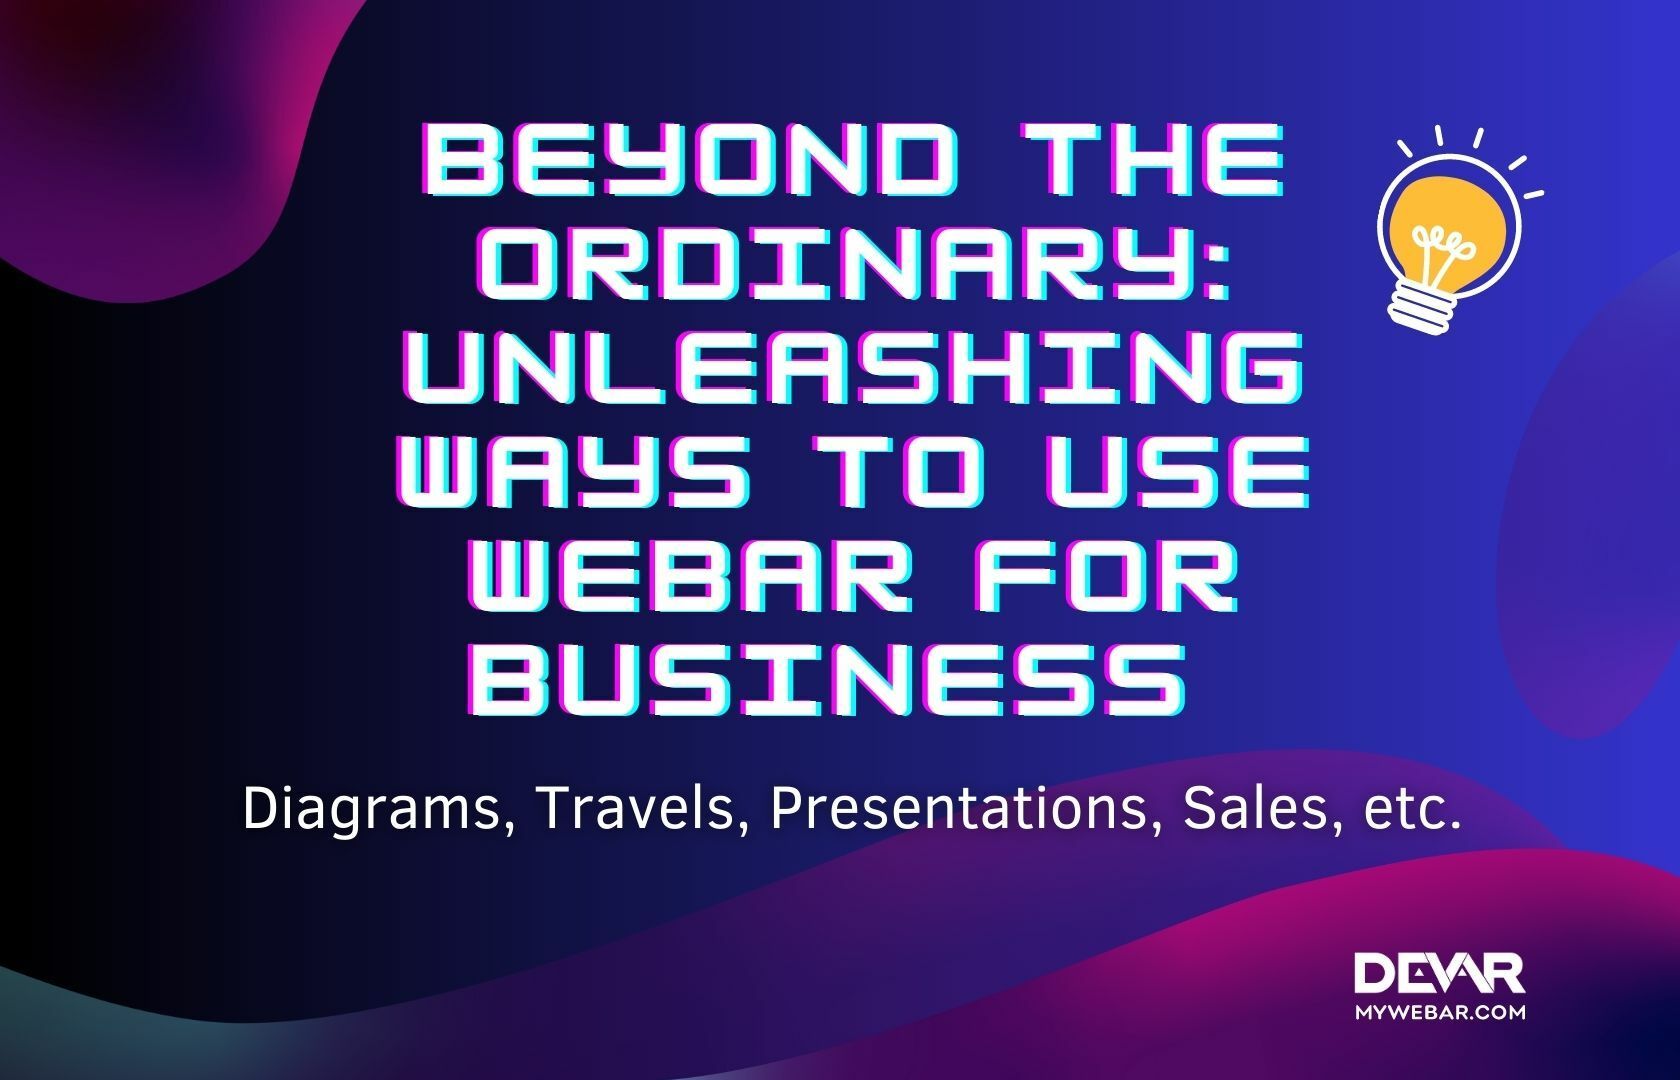 Beyond the Ordinary: Unleashing Ways To Use WebAR For Business